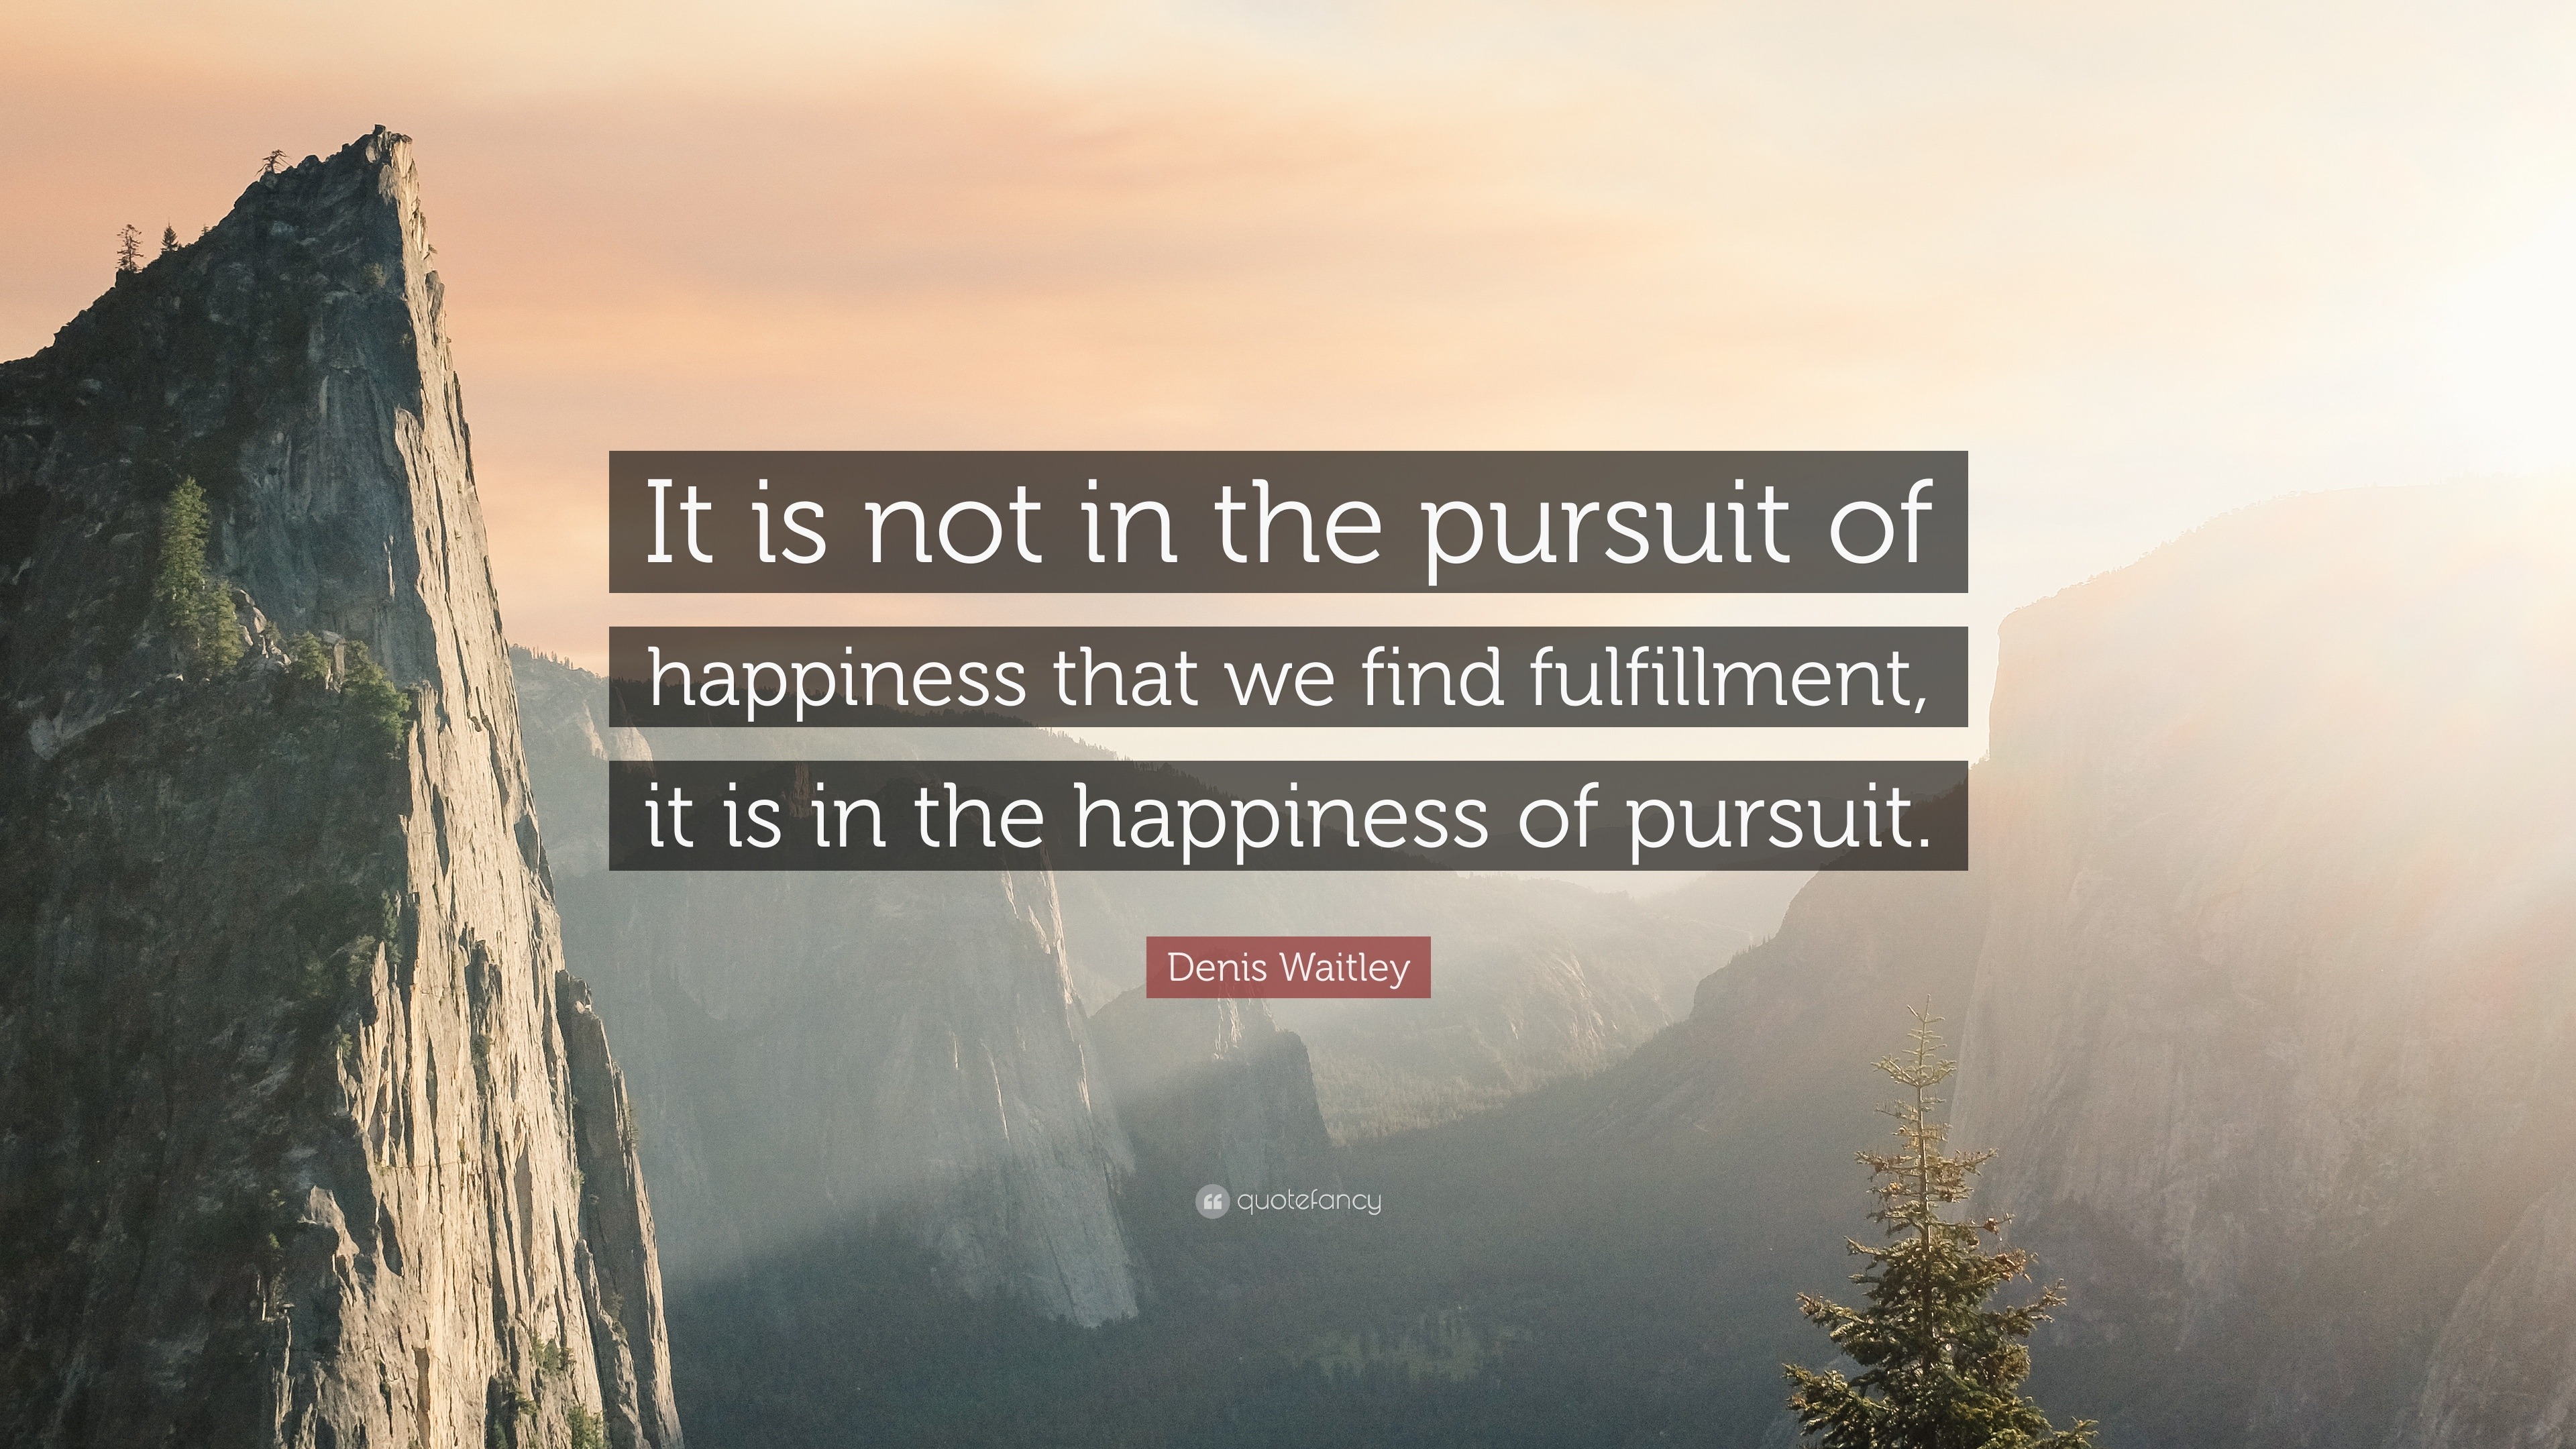 Denis Waitley Quote: “It is not in the pursuit of ...